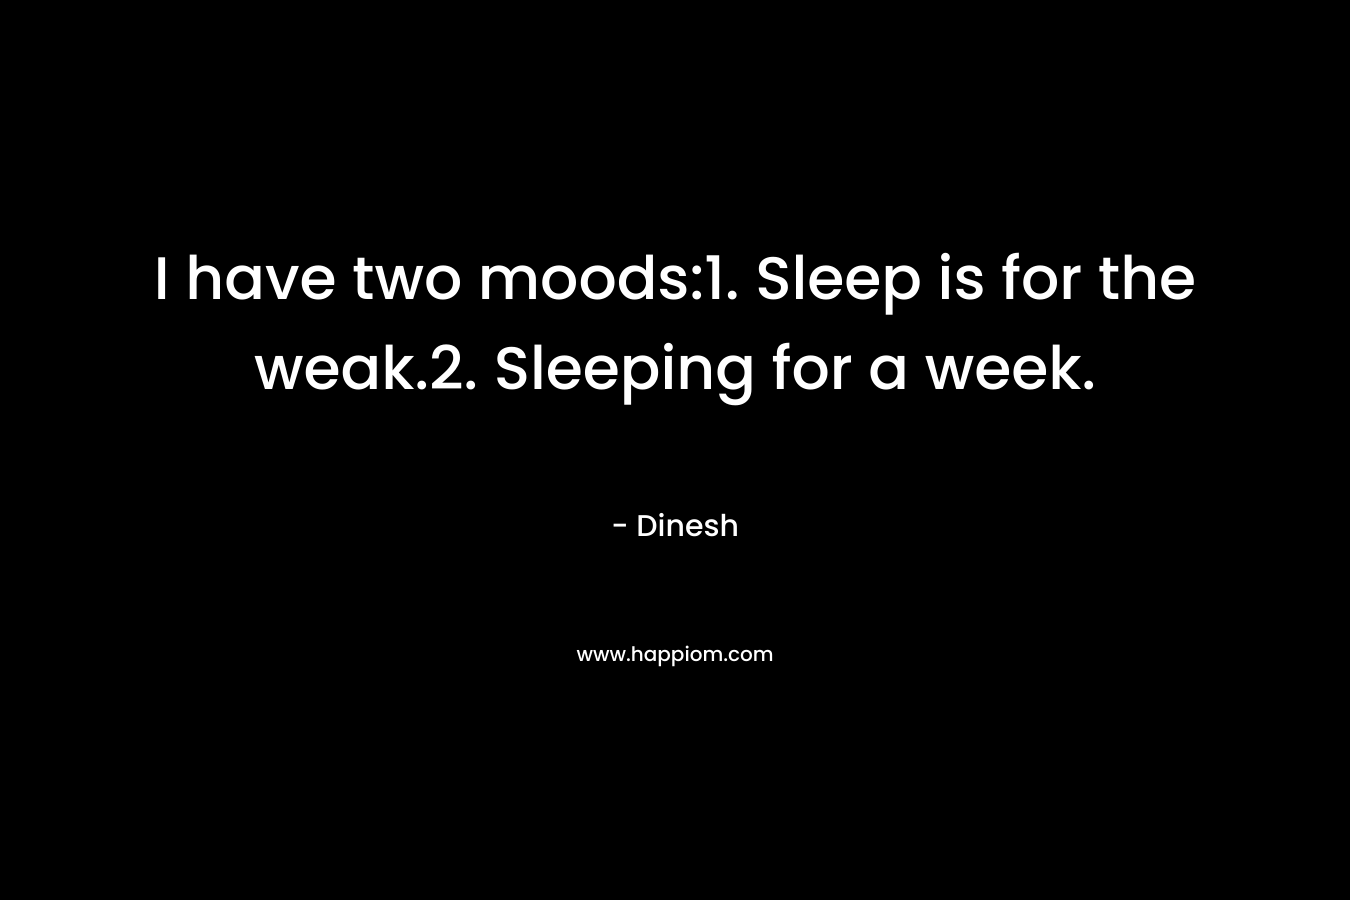 I have two moods:1. Sleep is for the weak.2. Sleeping for a week. – Dinesh